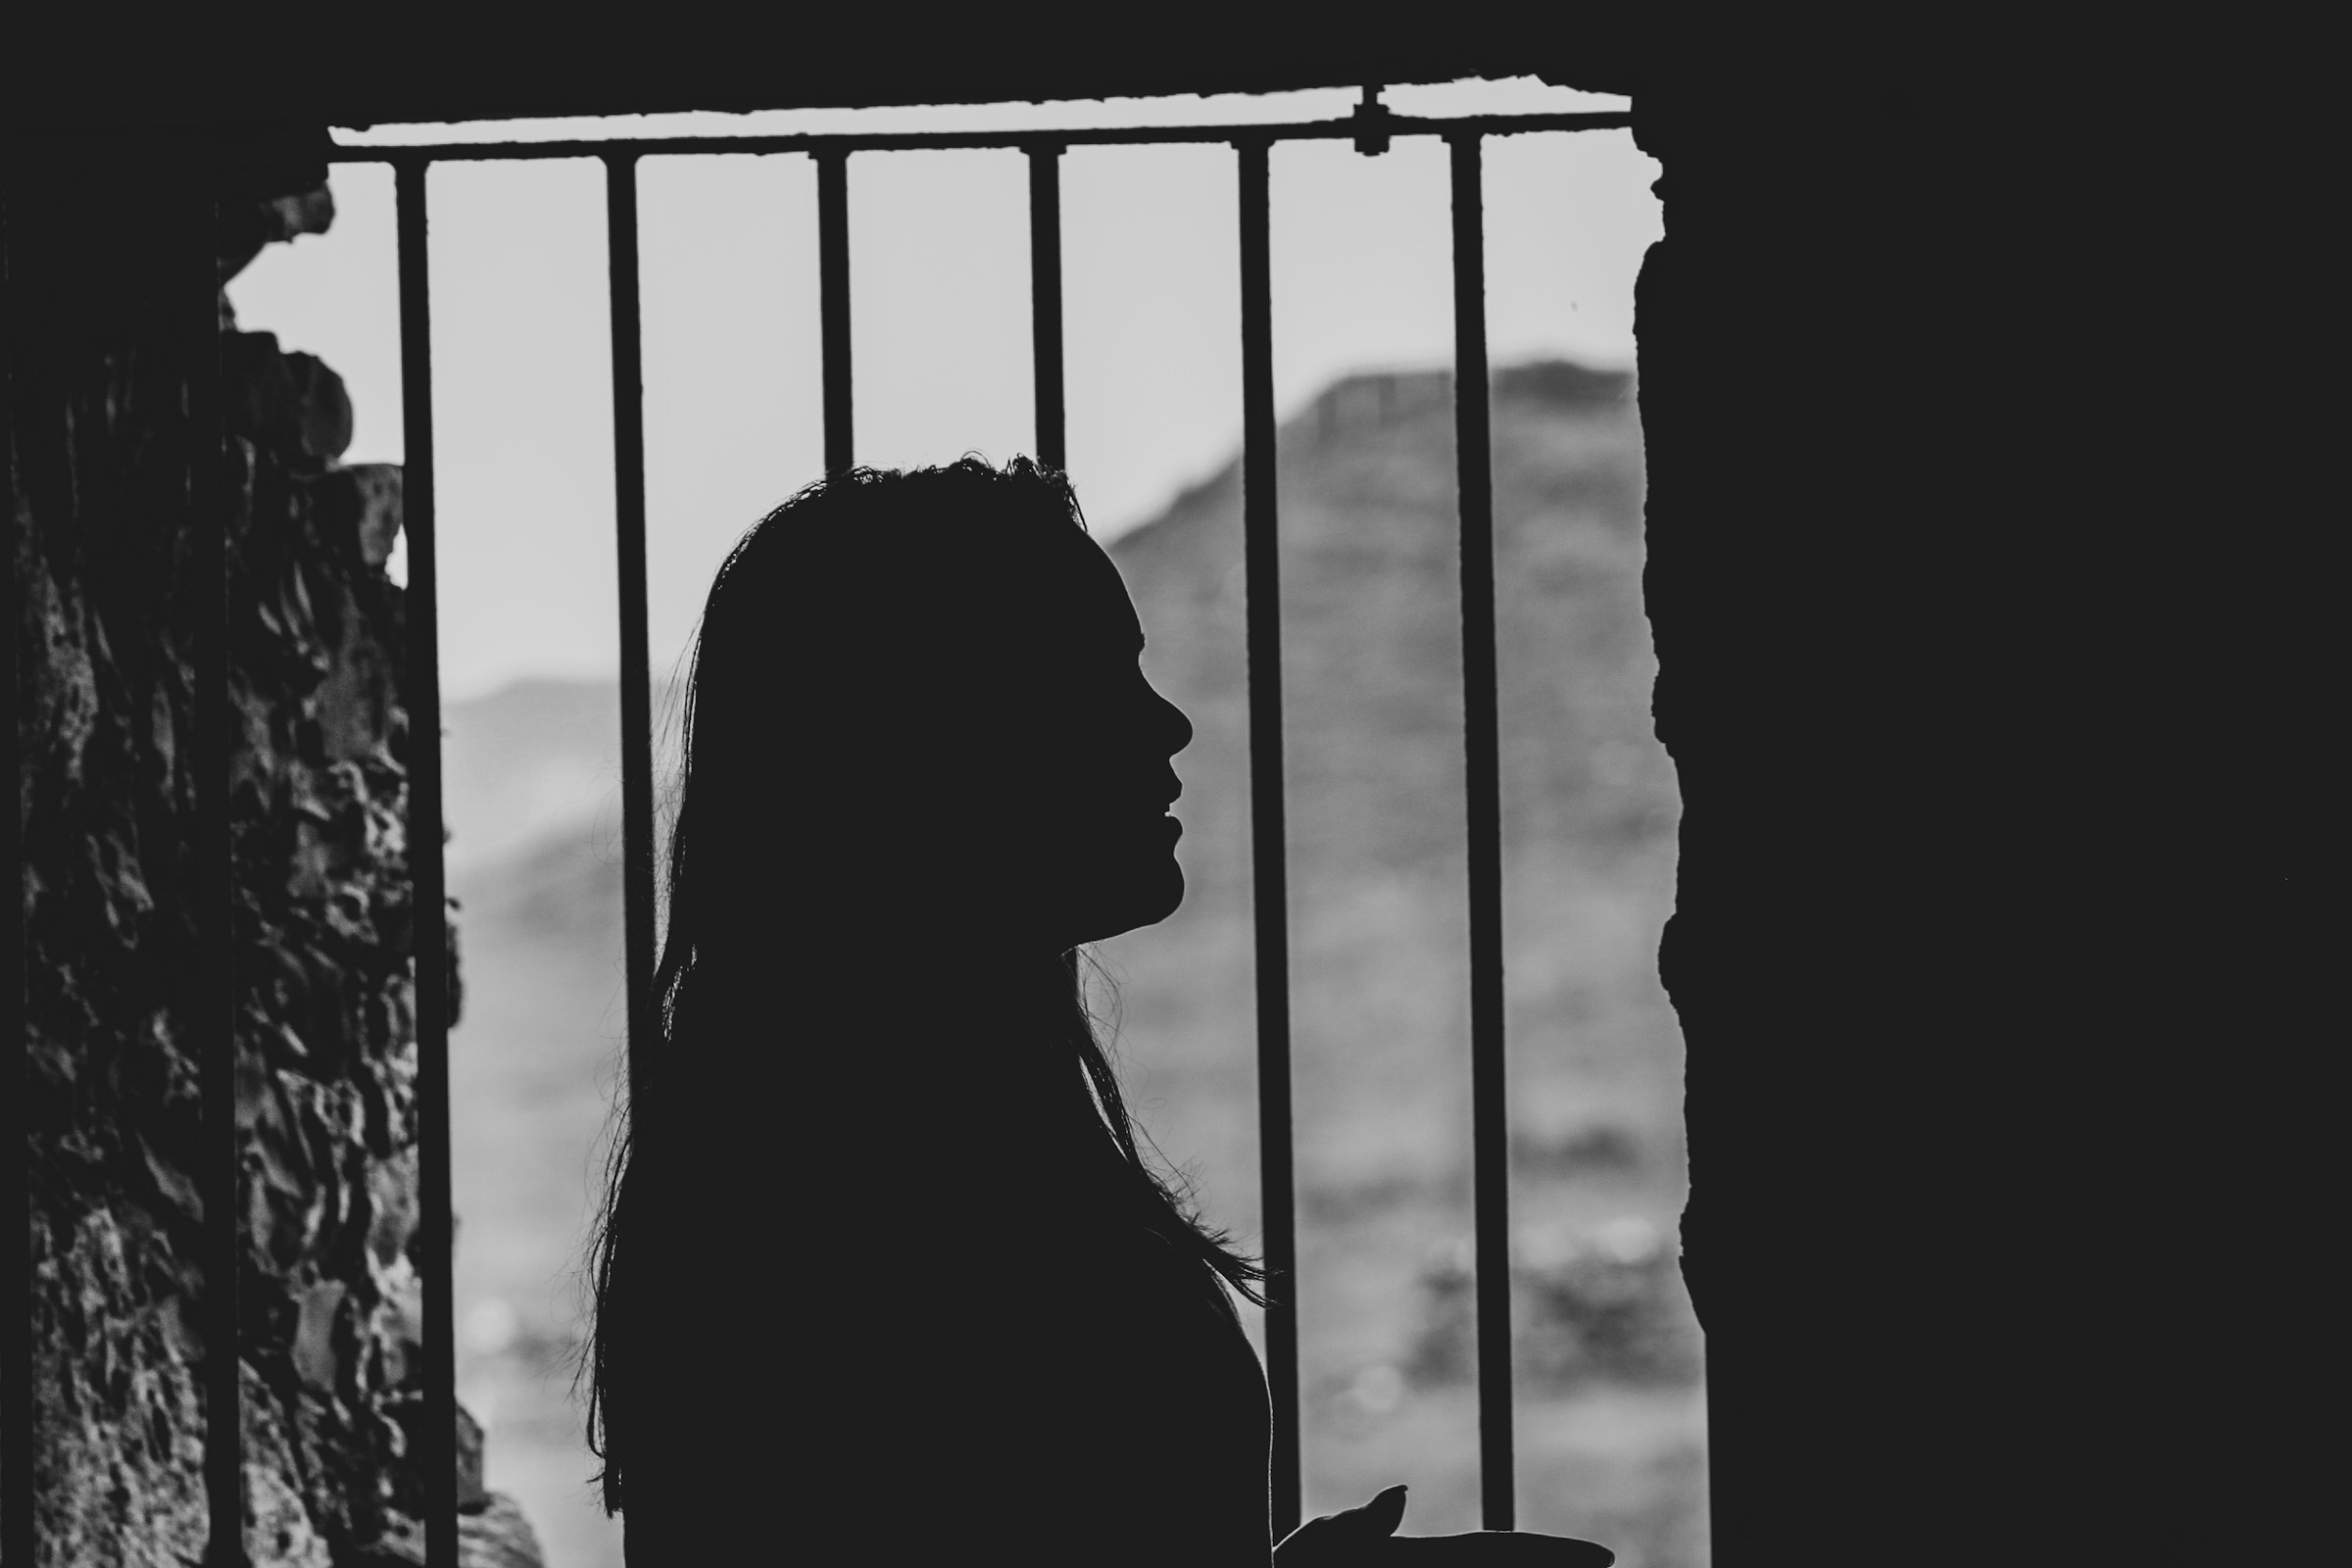 A woman's silhouette by the metal bar window | Source: Unsplash